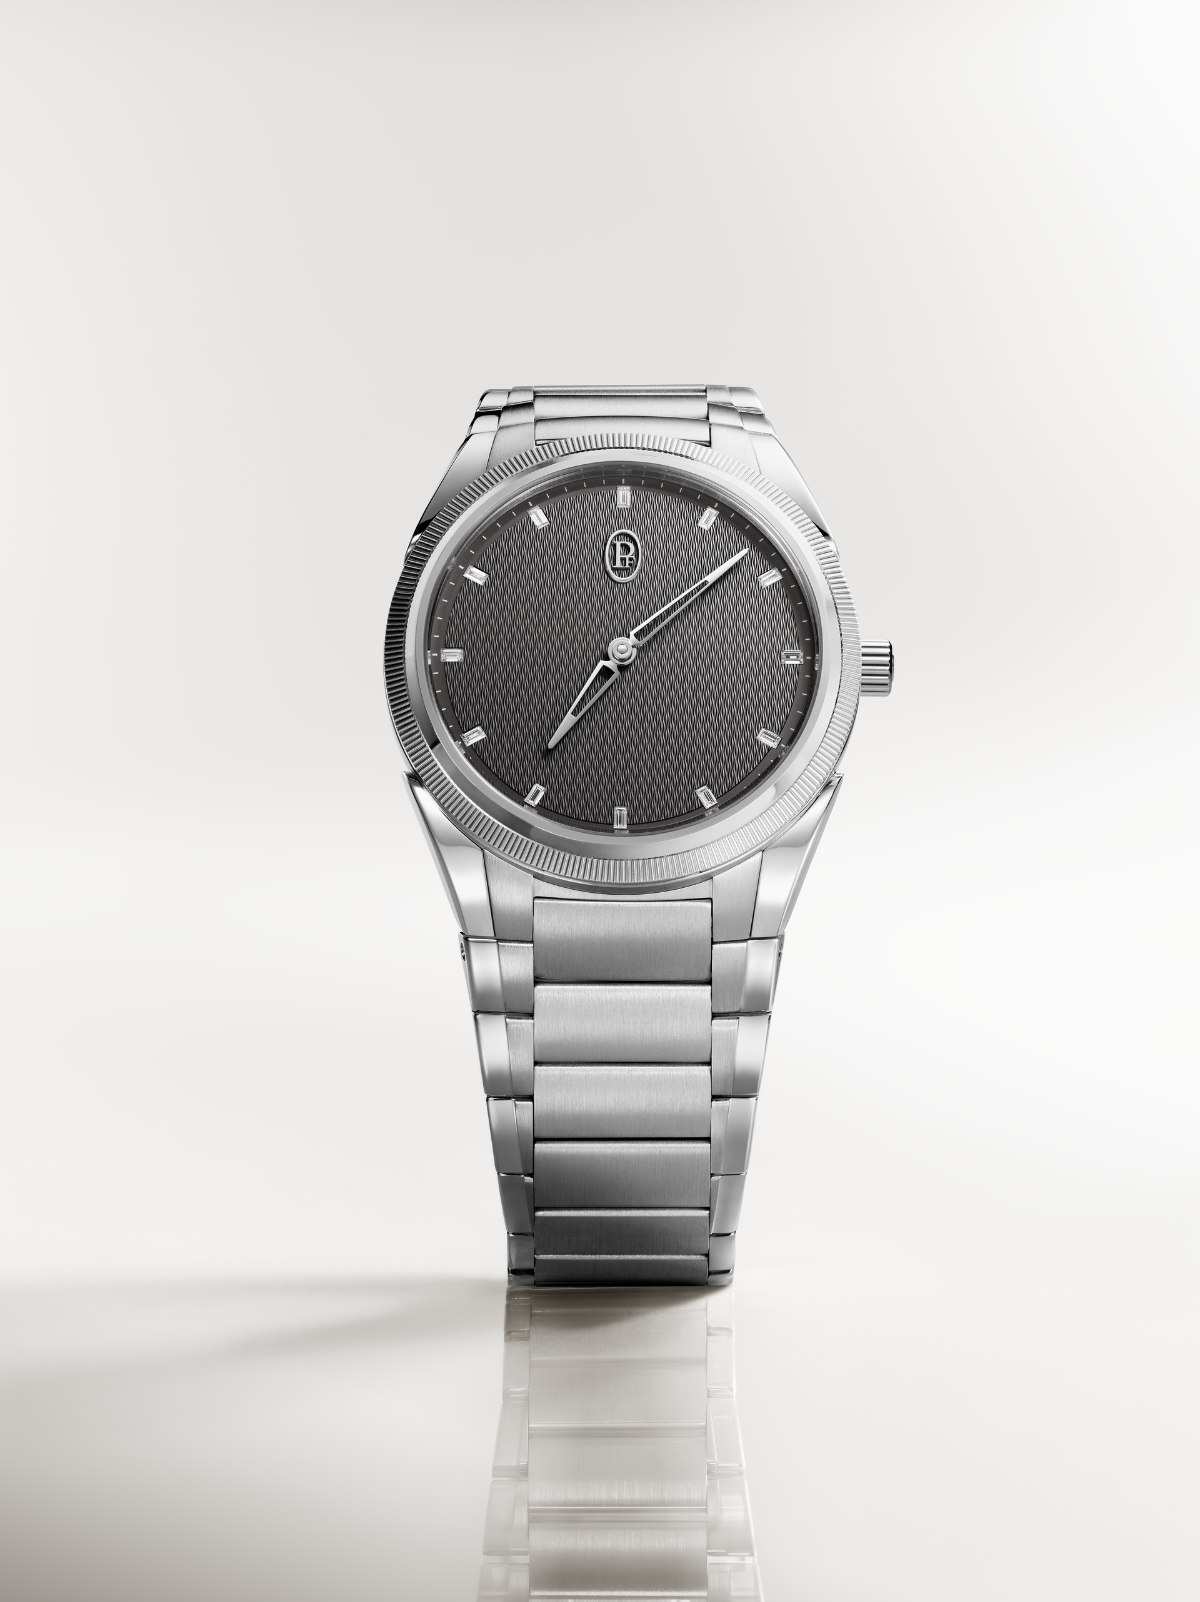 Parmigiani Fleurier Presents The New Tonda PF Automatic In 36 MM - “Do Small, Think Big”